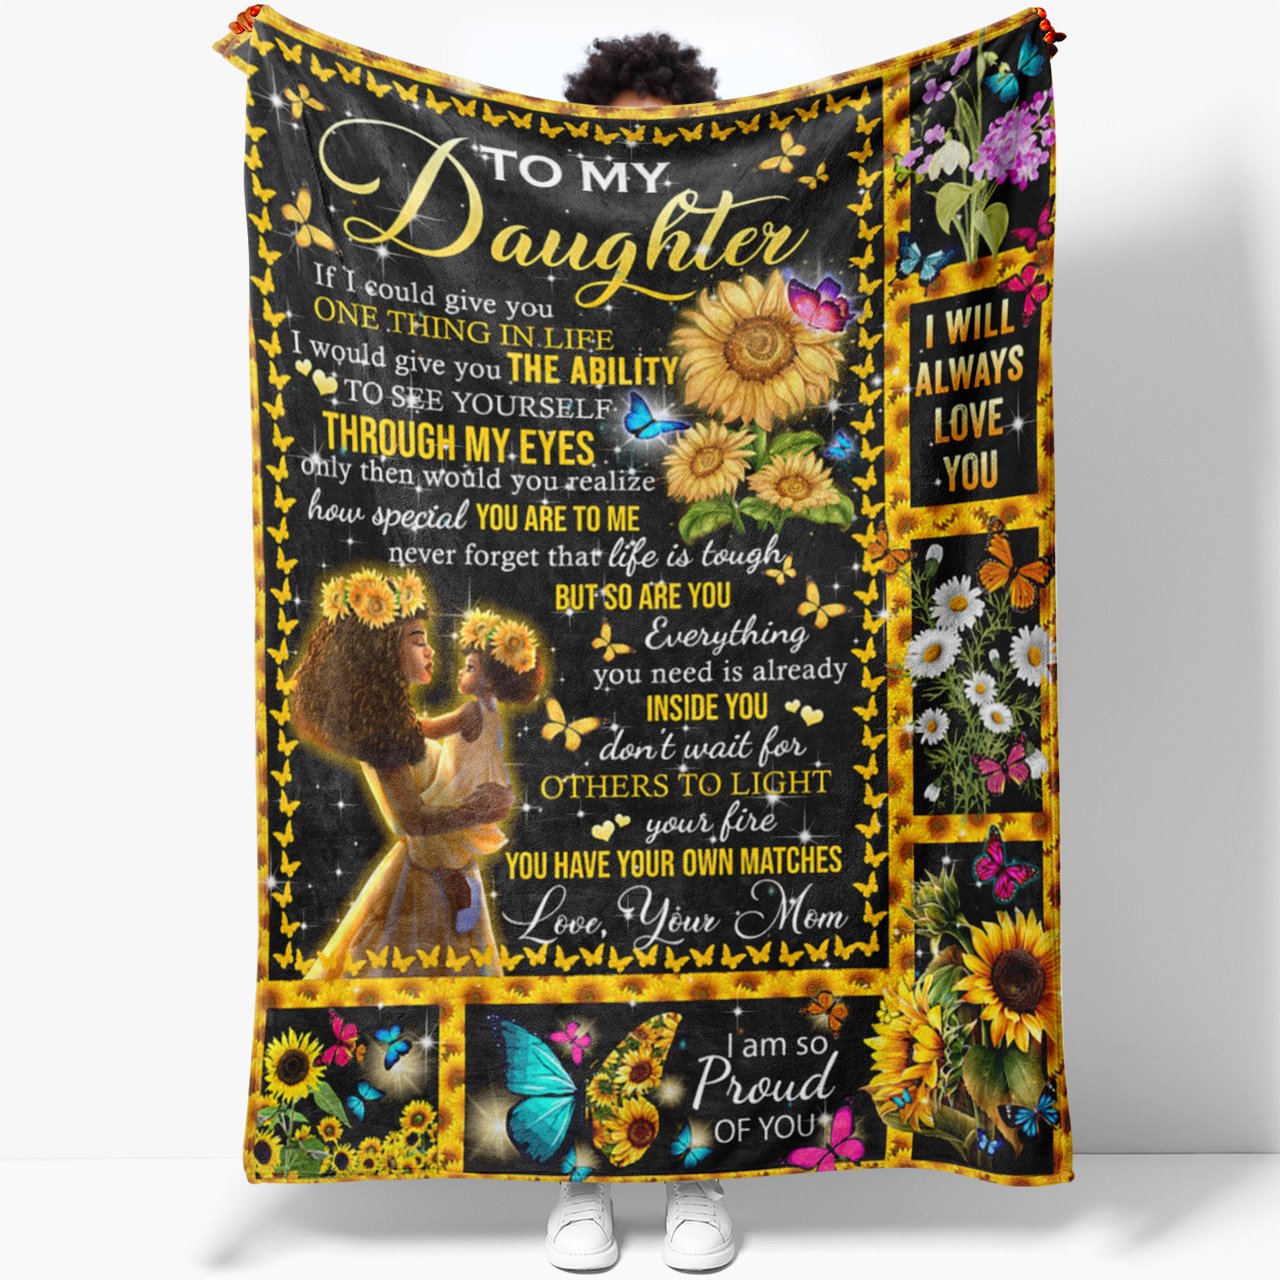 To My Sunflower Black Daughter Blanket, You Are Special to Me You Are My Sunshine Blanket, Special Unique Surprise Birthday Gift Ideas For Daughter